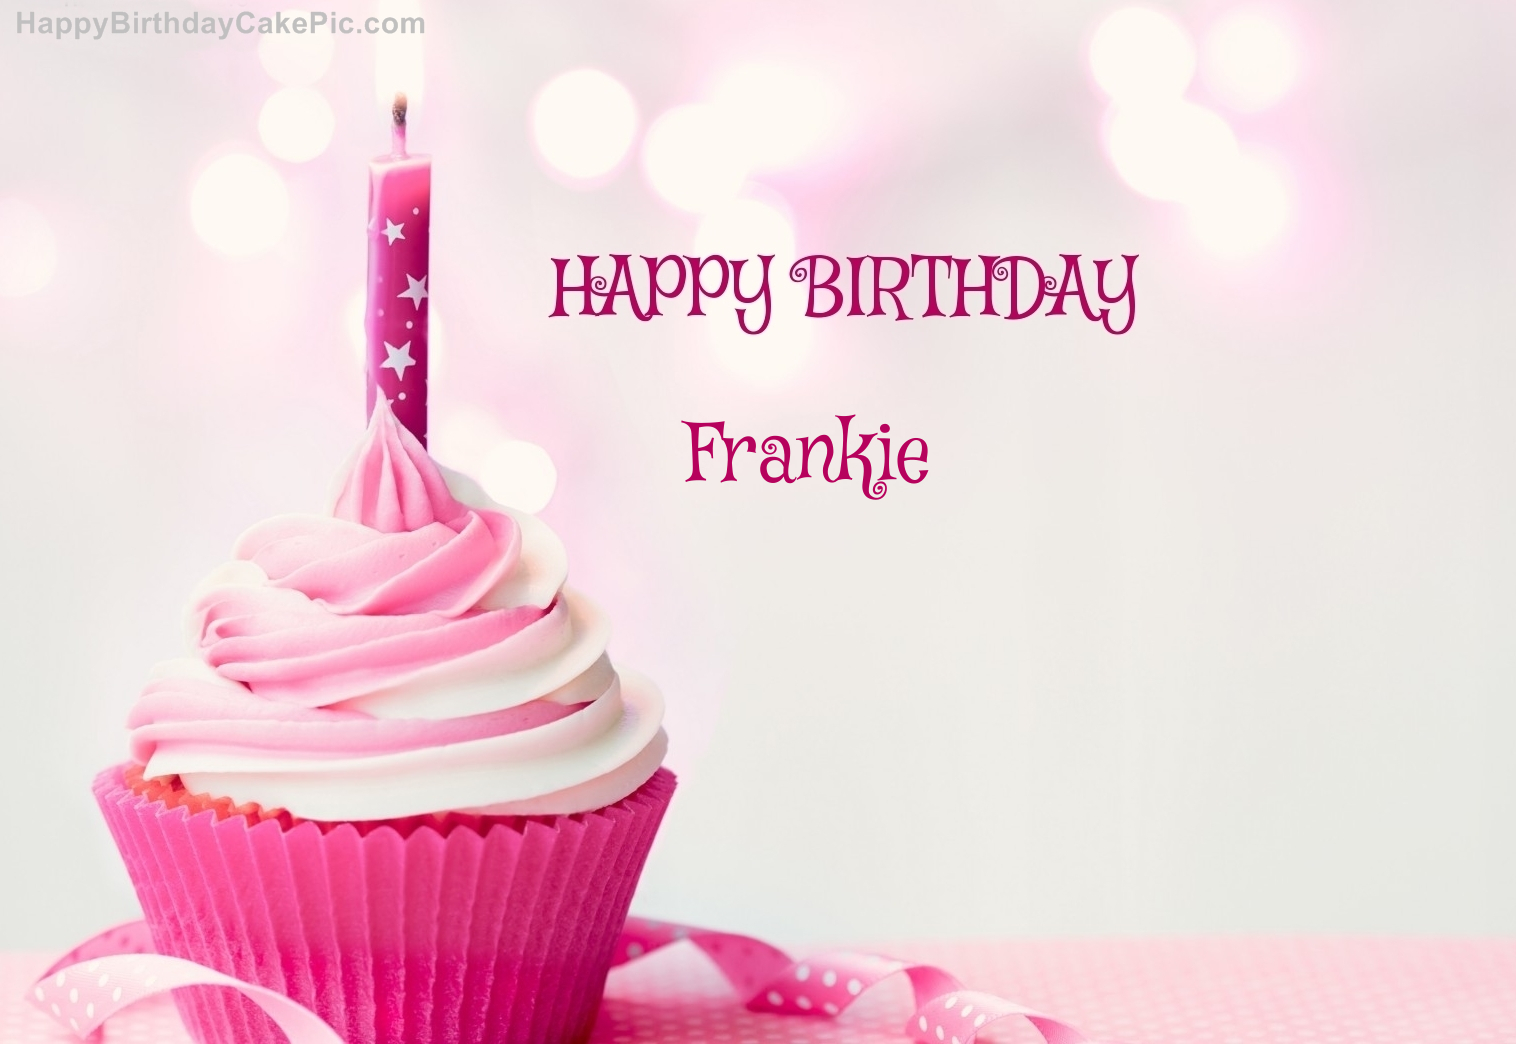 Image result for happy birthday frankie  cupcake pic